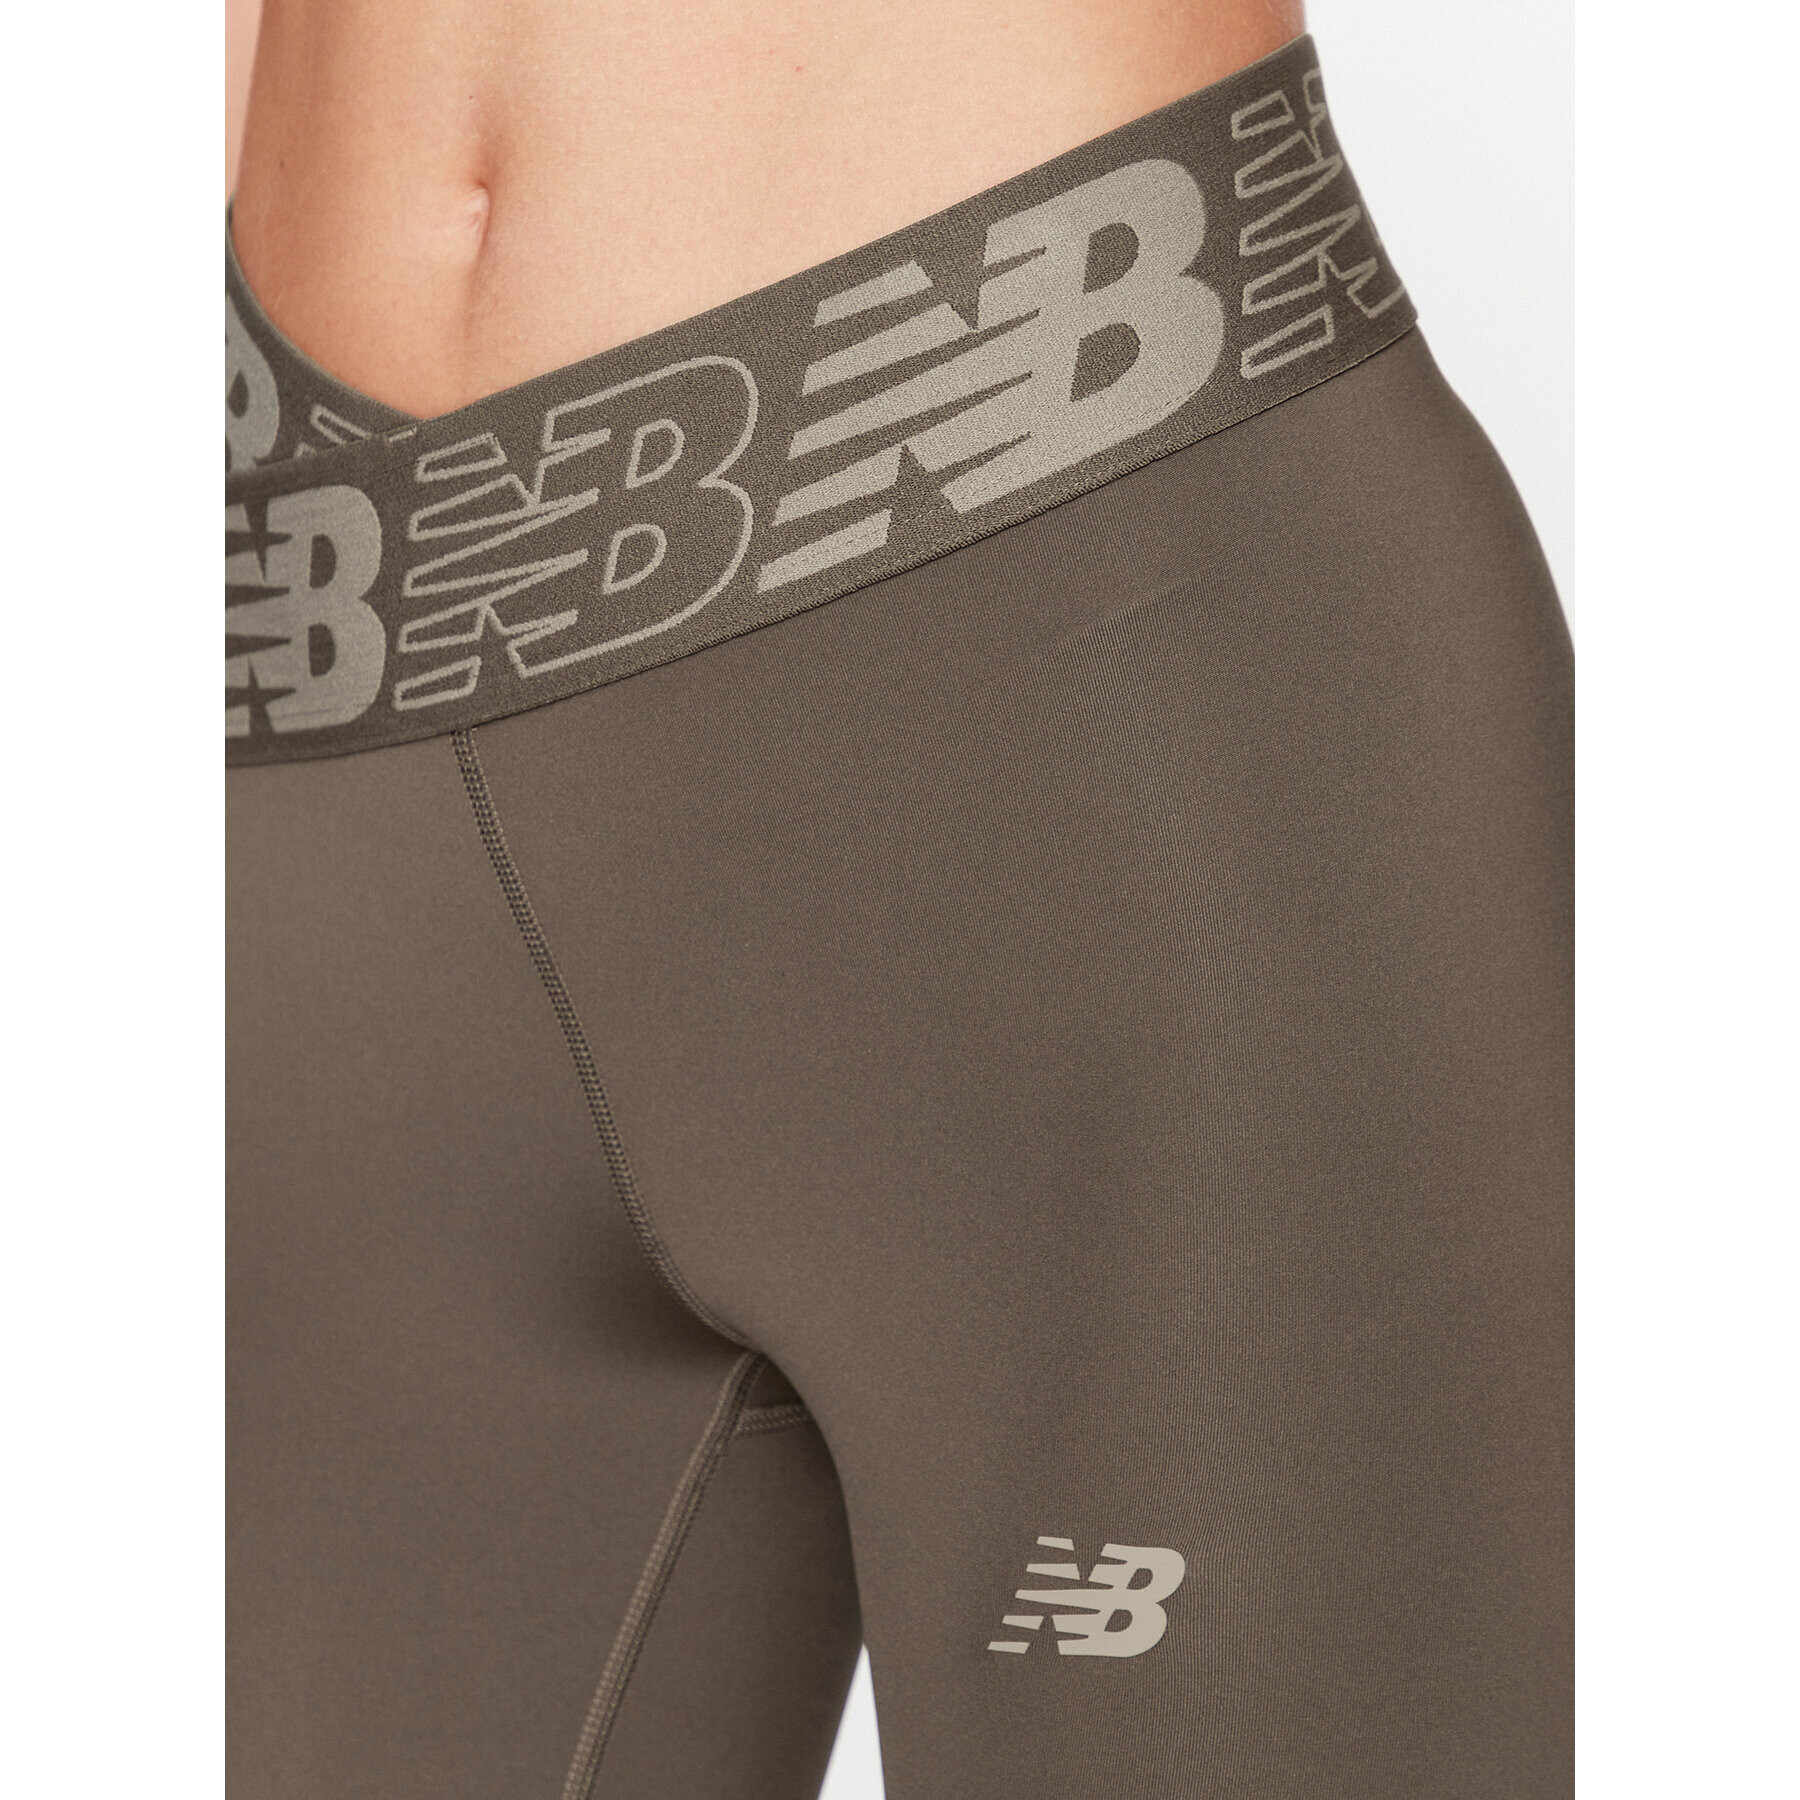 New Balance WP21177 Relentless Crossover High Rise 7/8 Tight